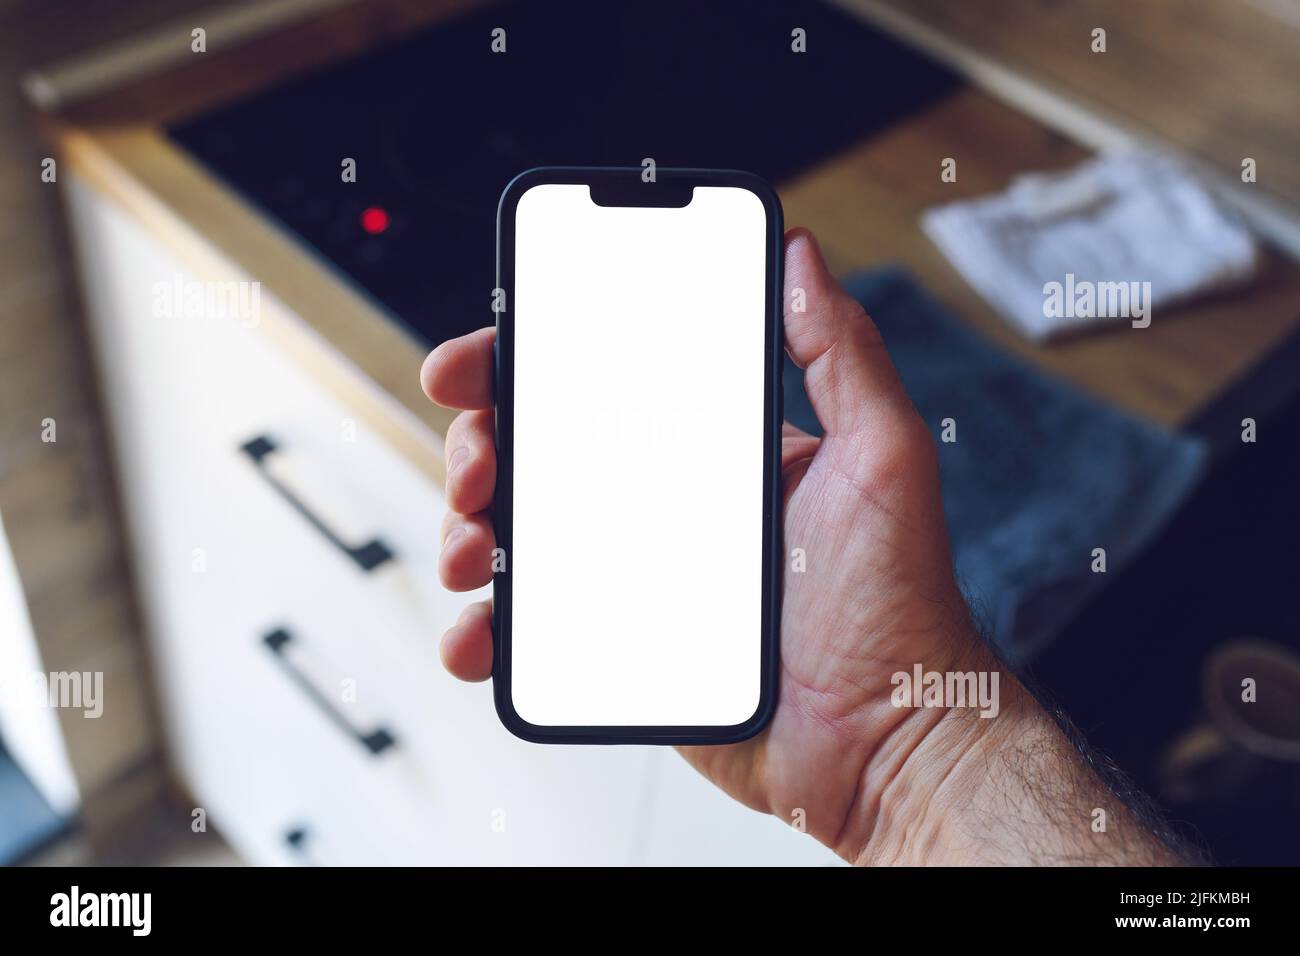 Home automation and internet of things concept, male hand holding smart phone with blank mockup screen in front of kitchen counter, selective focus Stock Photo